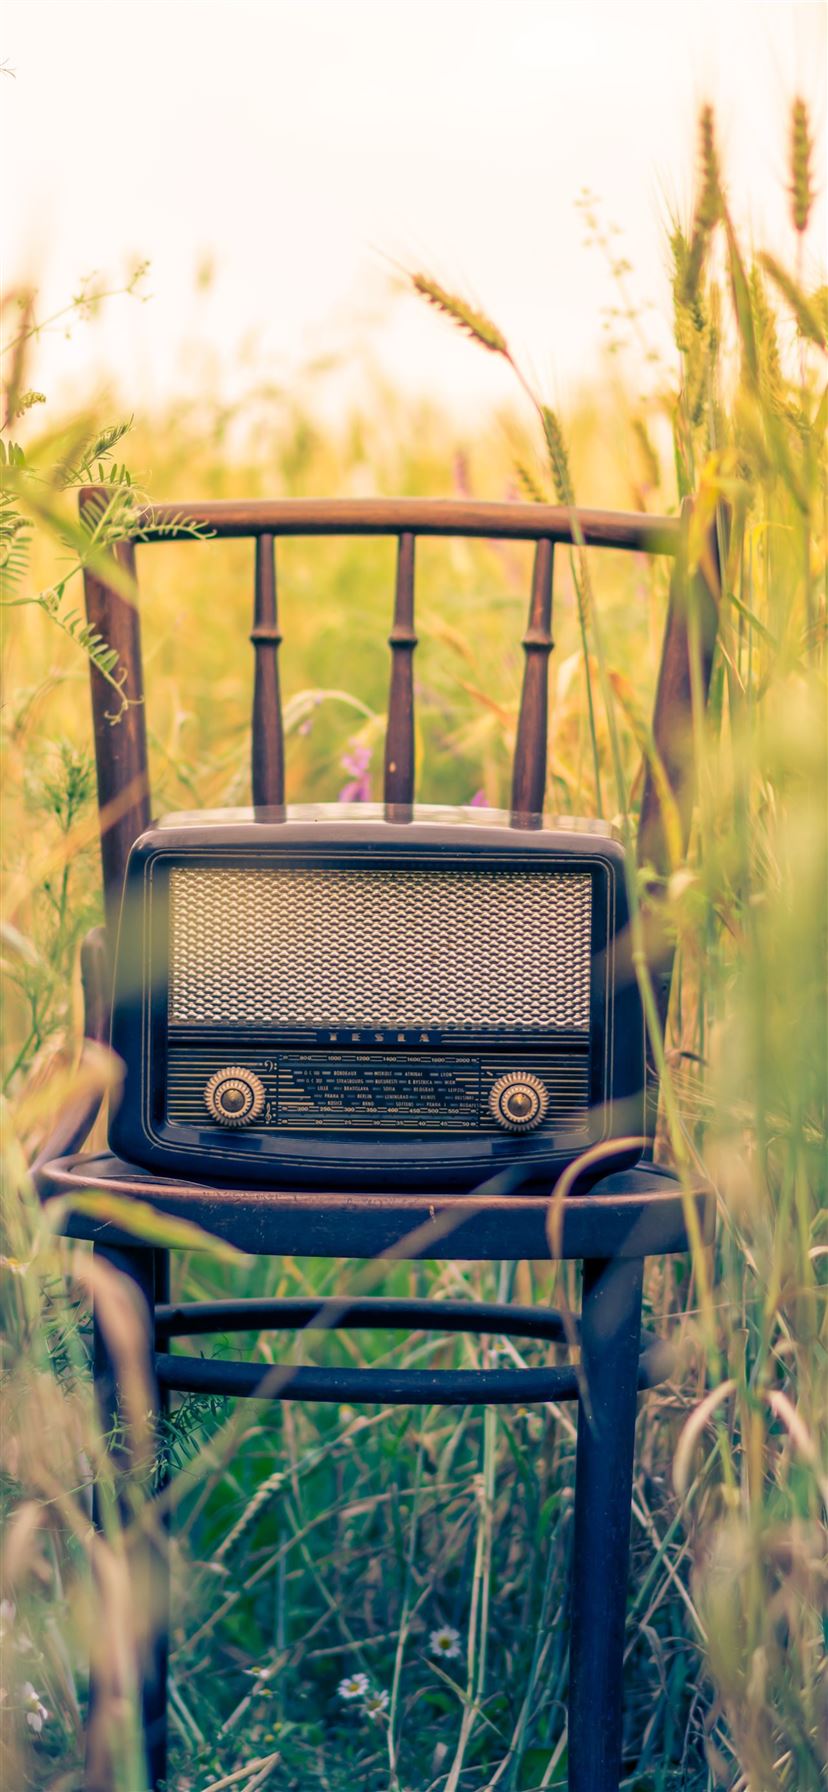 black transistor radio in the middle of the field iPhone 11 wallpaper 